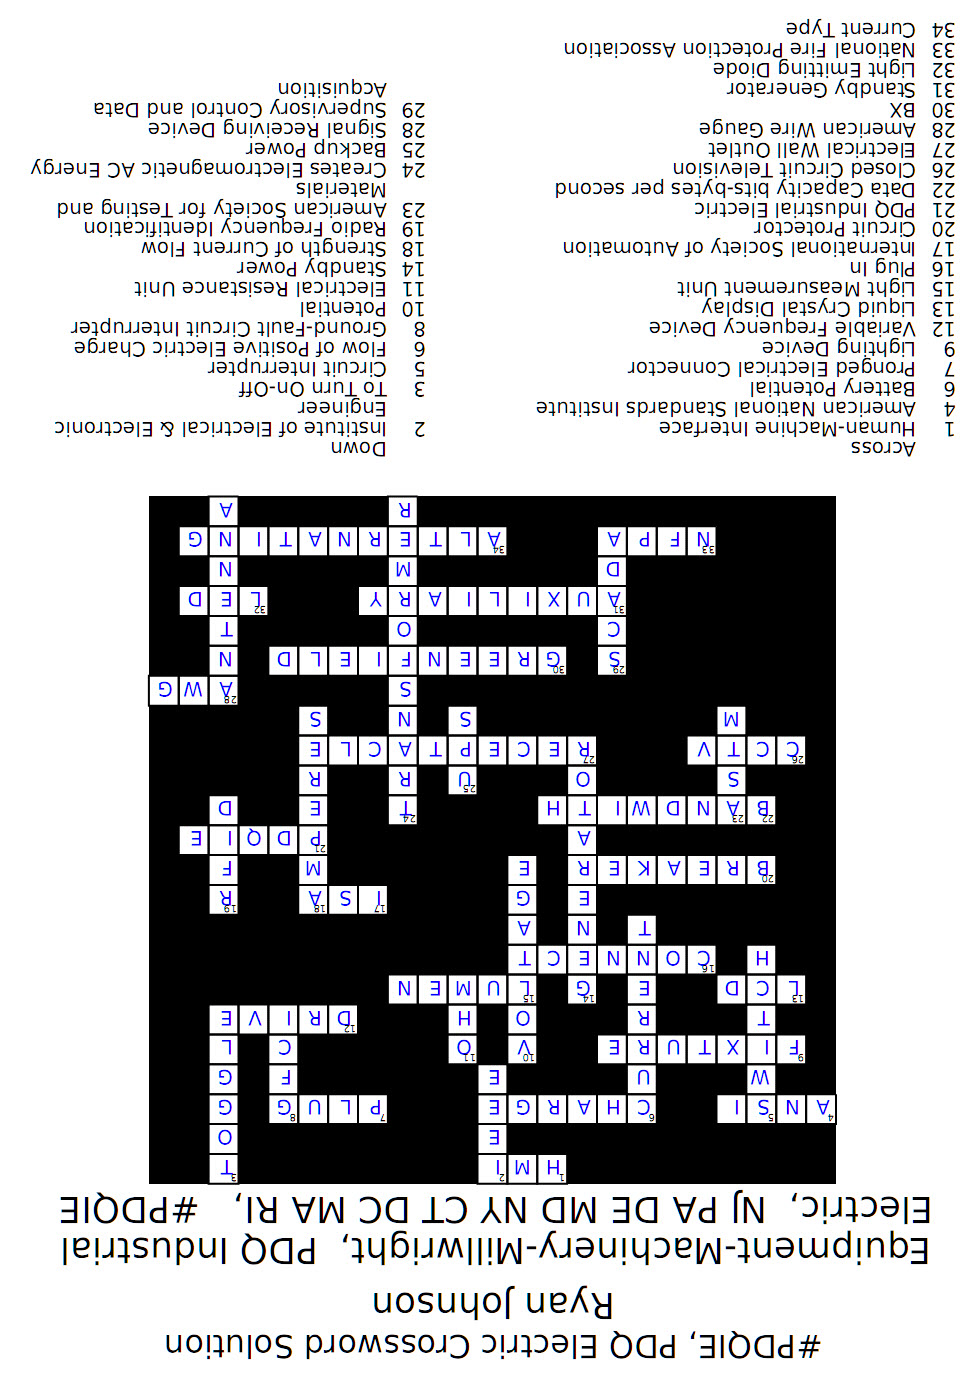 PDQIE Crossword Puzzle Solution Upside Down